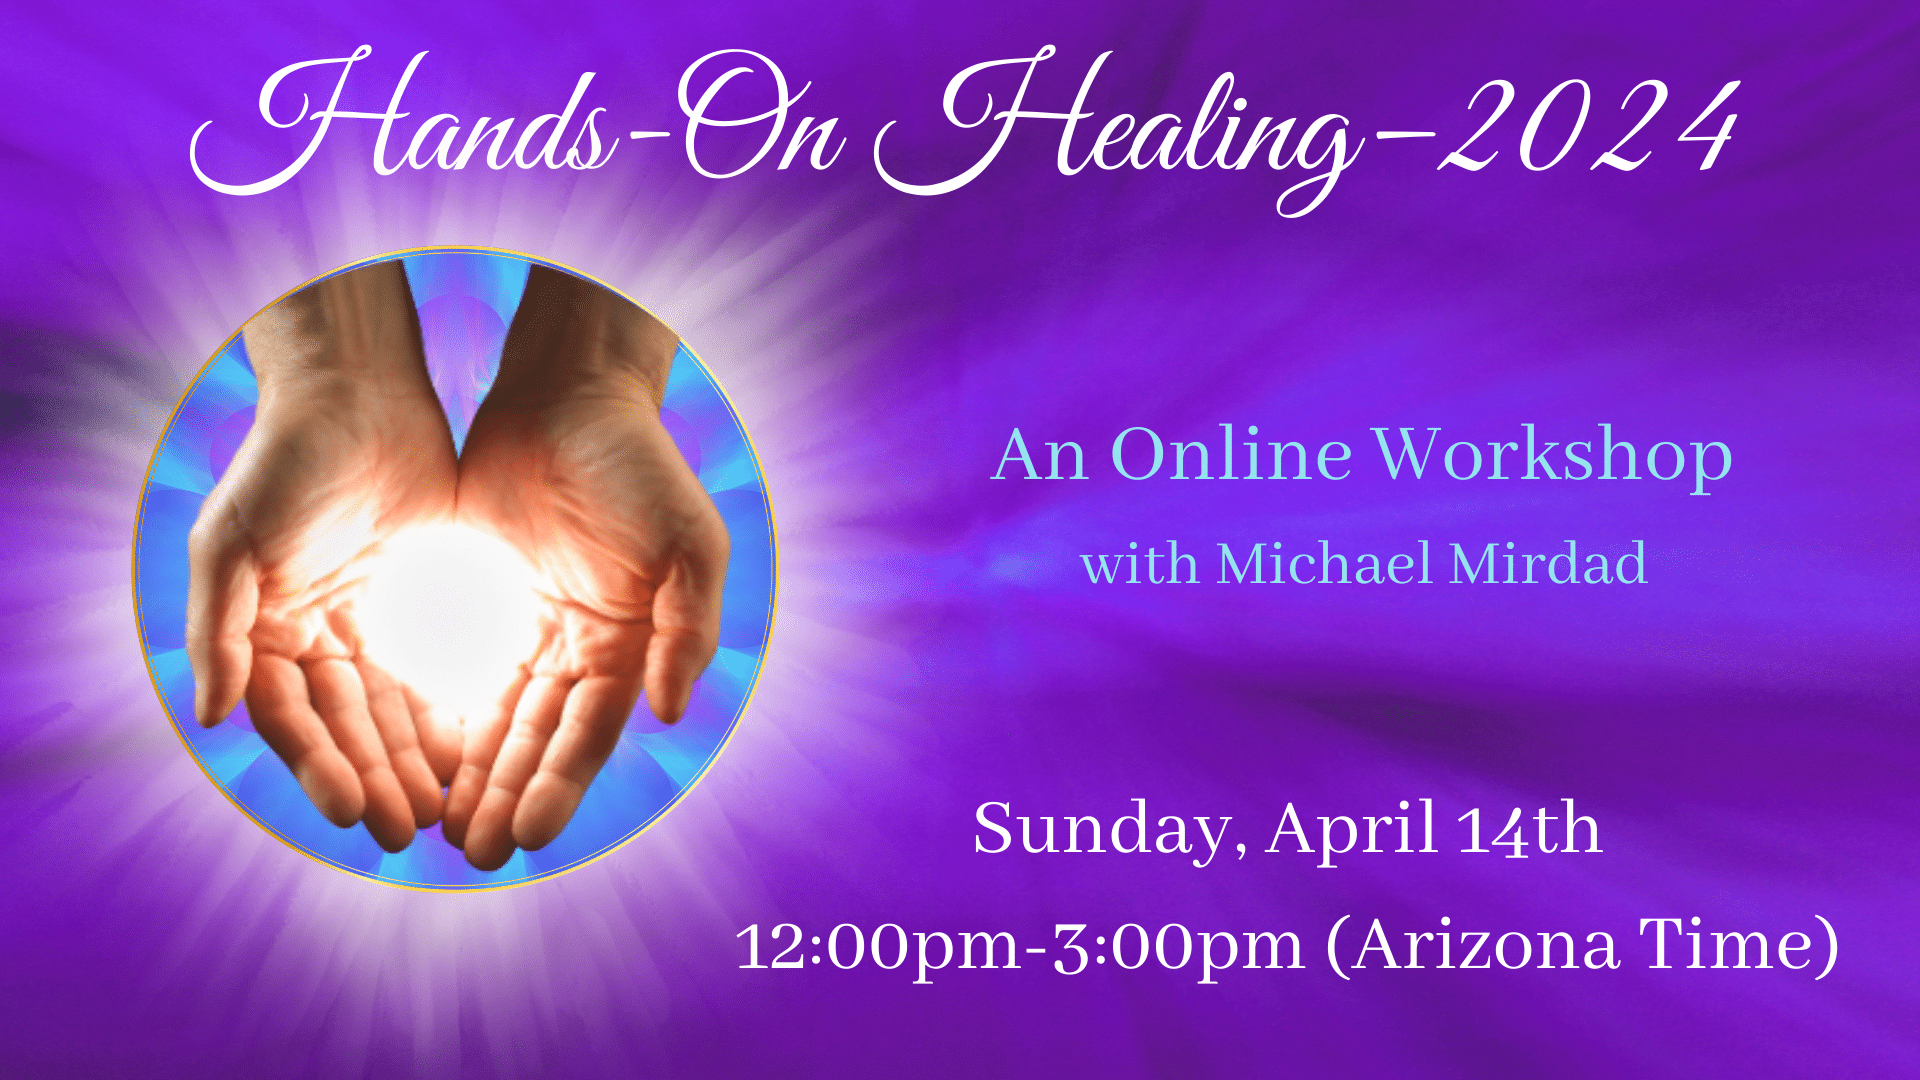 Promotional auto draft for "hands-on healing—2024," an online workshop scheduled for Sunday, April 14th, featuring an image of cupped hands surrounding a glowing light, set against a